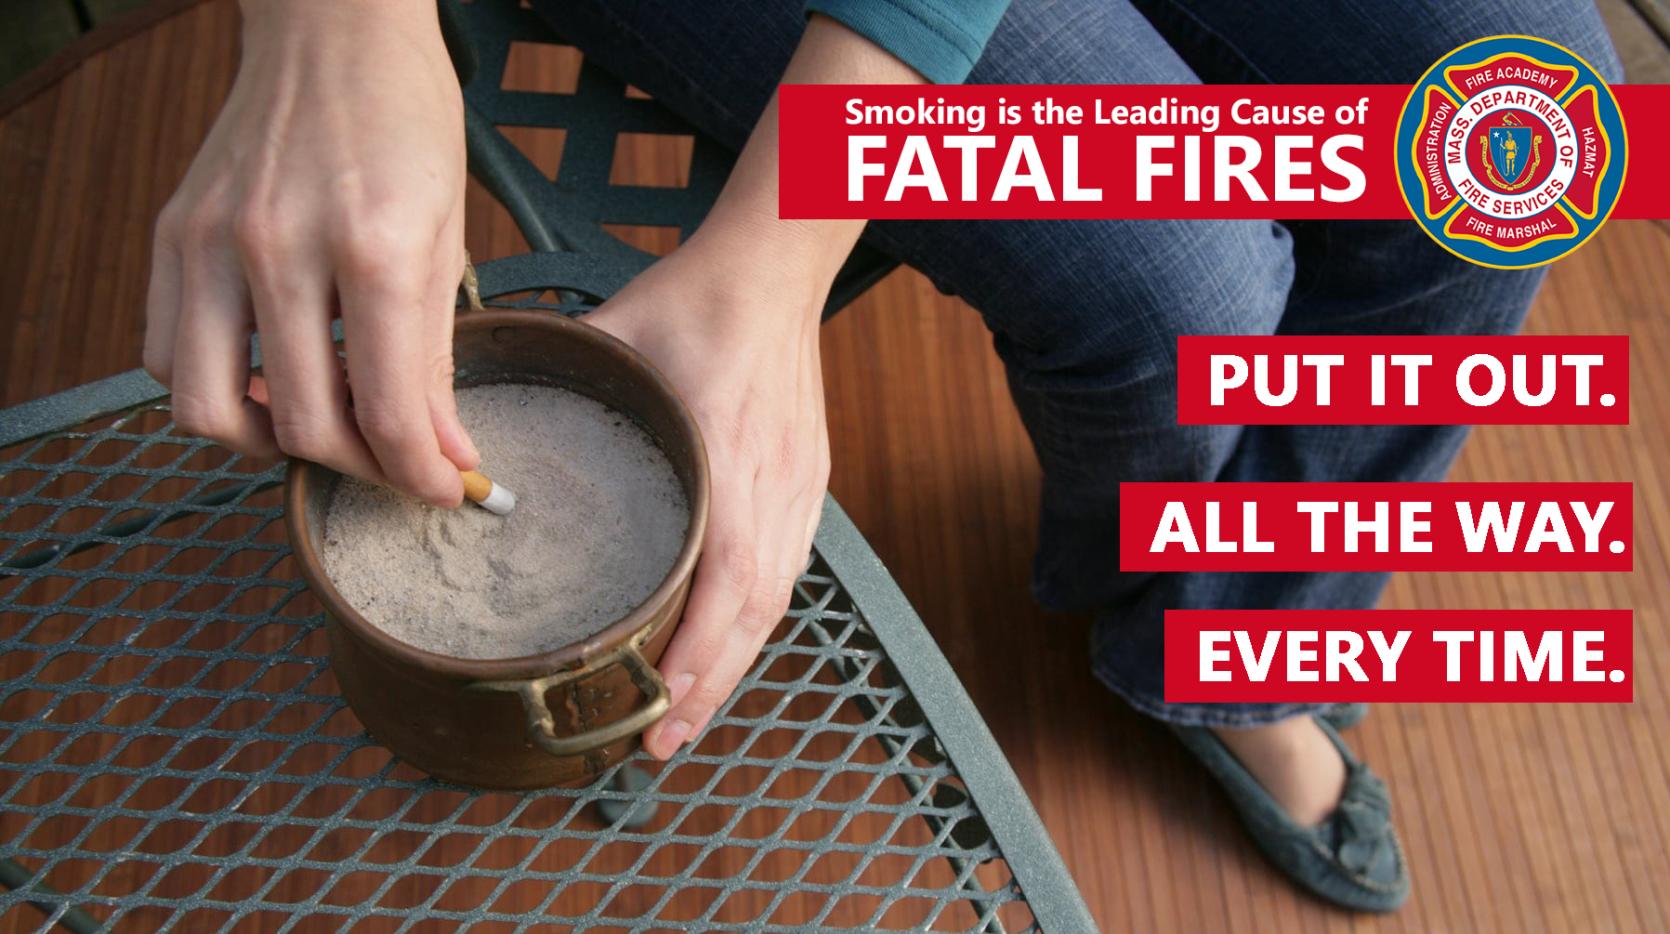 Picture of a person extinguishing a cigarette and the words "put it out, all the way, every time"